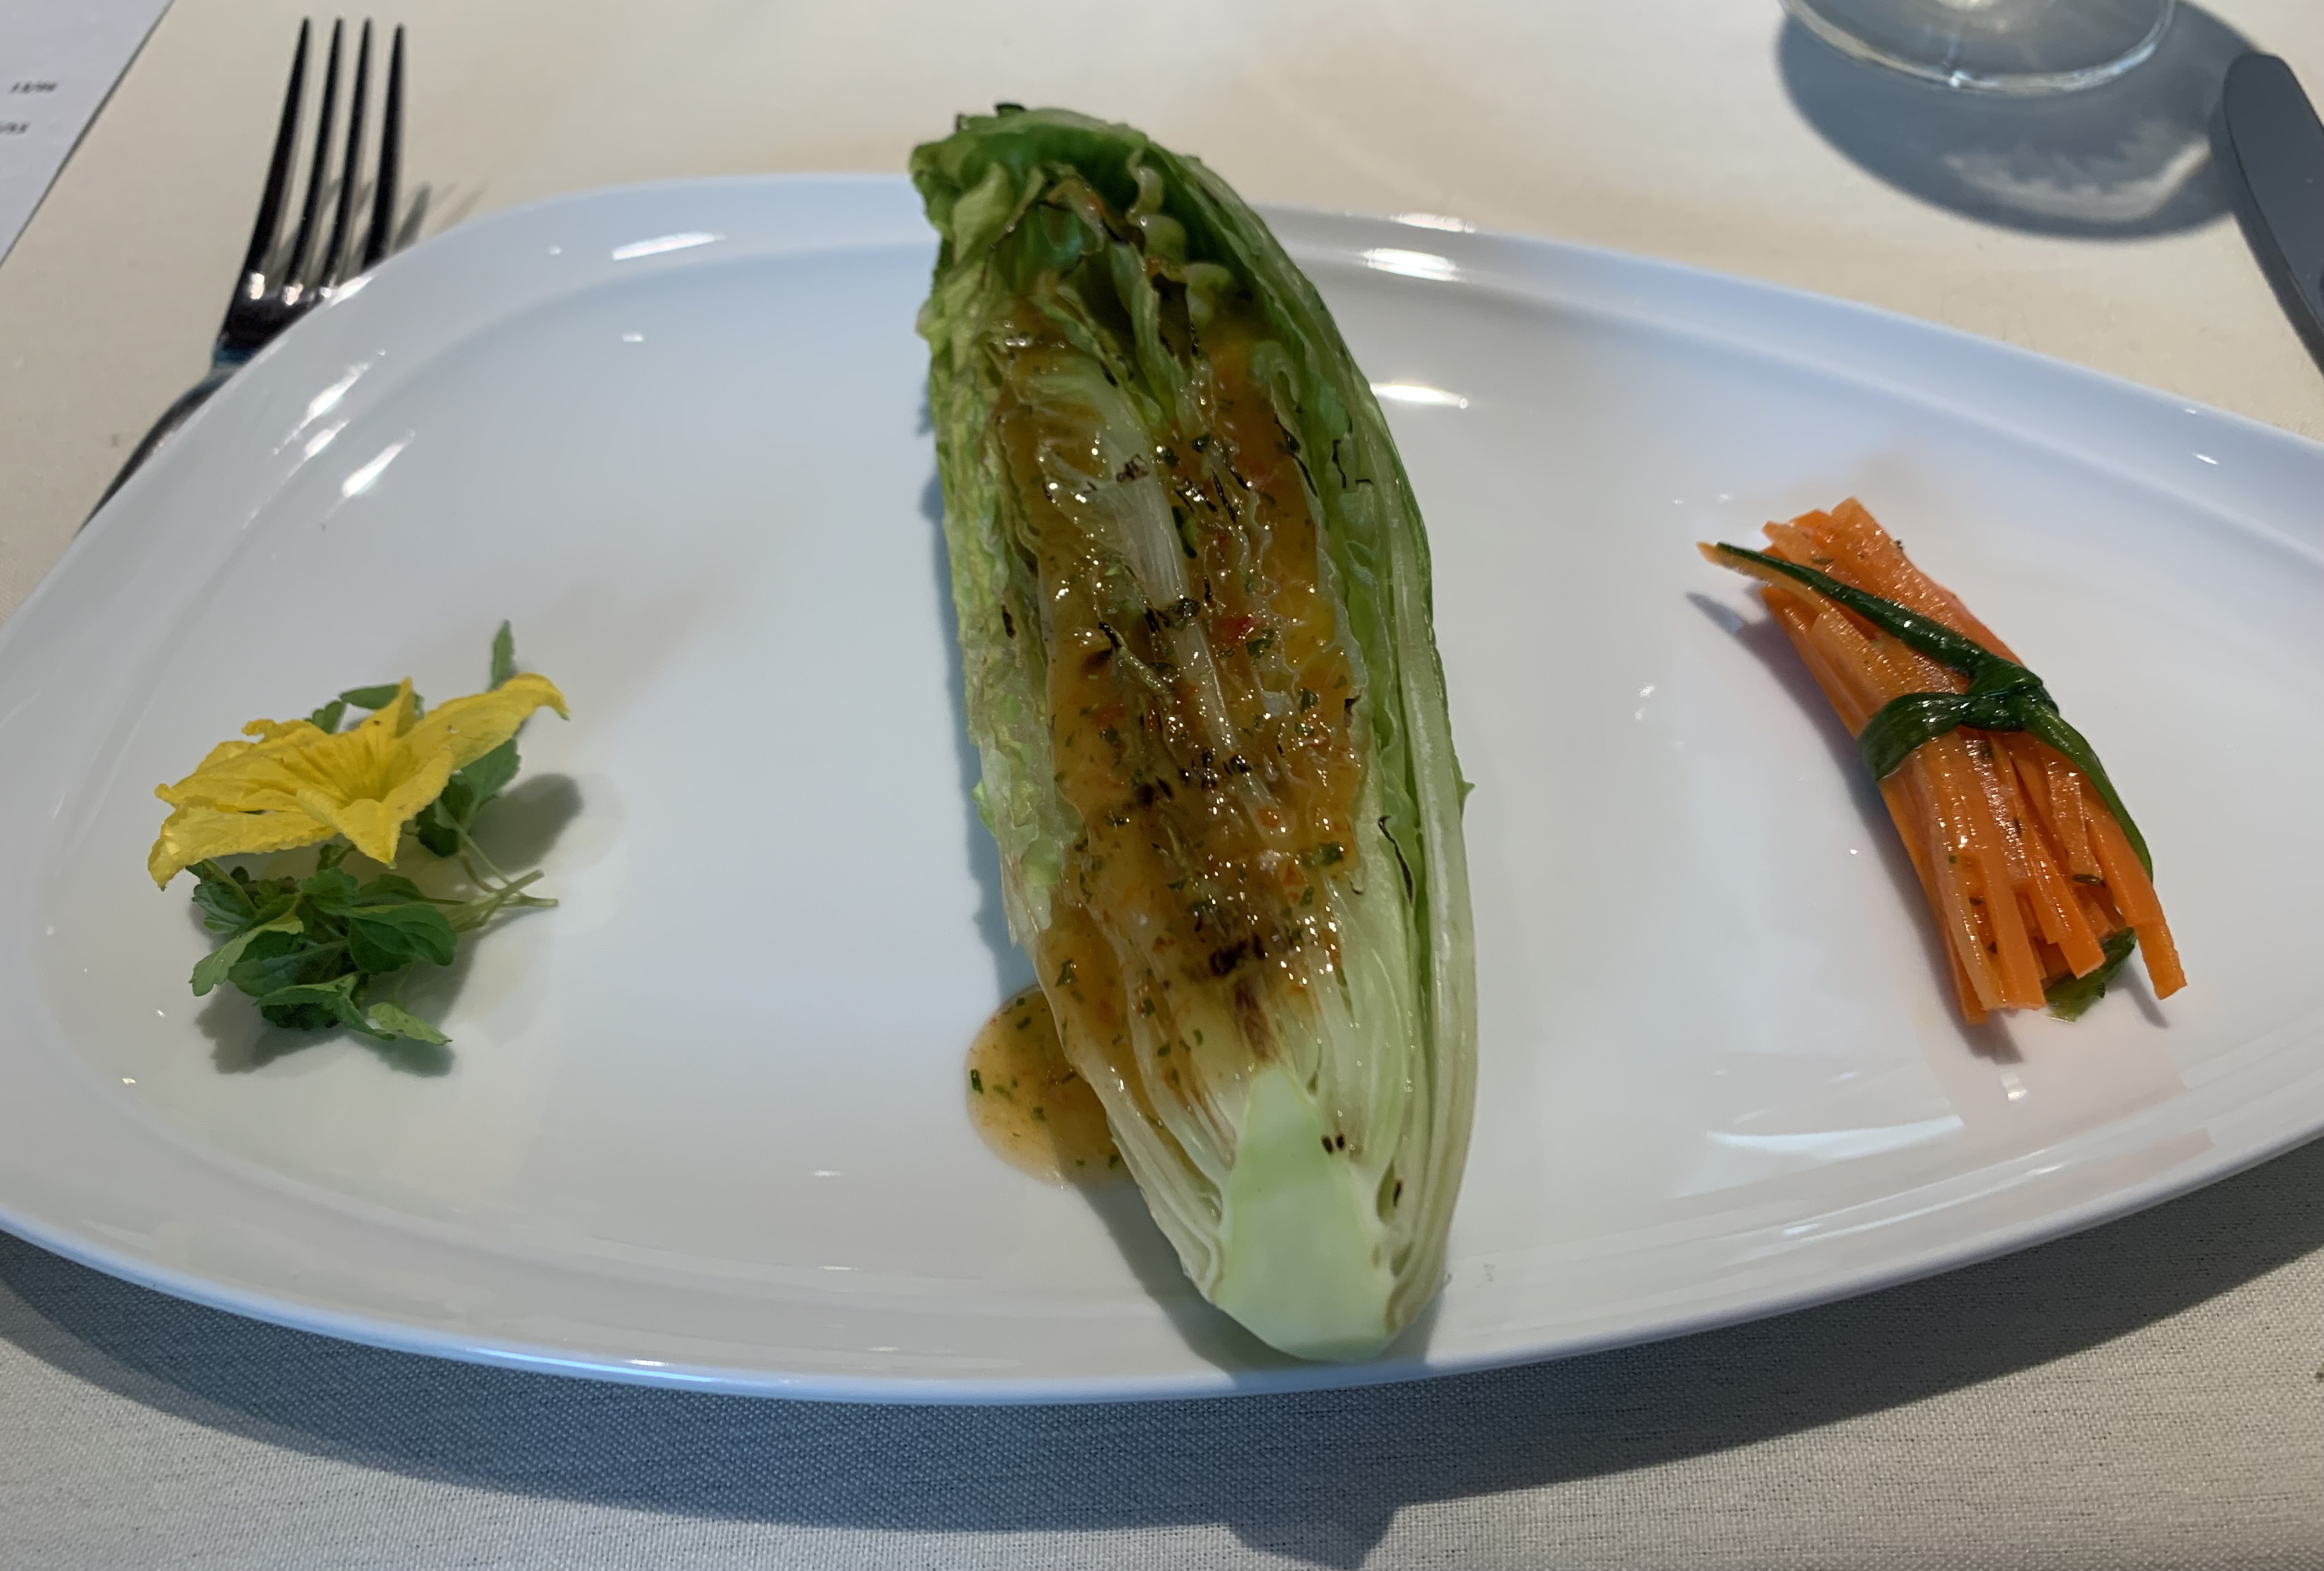 Romaine heart with the leaves still attached that has been cut in half and grilled, with visible grill marks on the lettuce. The lettuce has been dressed with a brown sauce. A bundle of shiny, sauced carrots is next to it, tied off with a wilted green onion. 